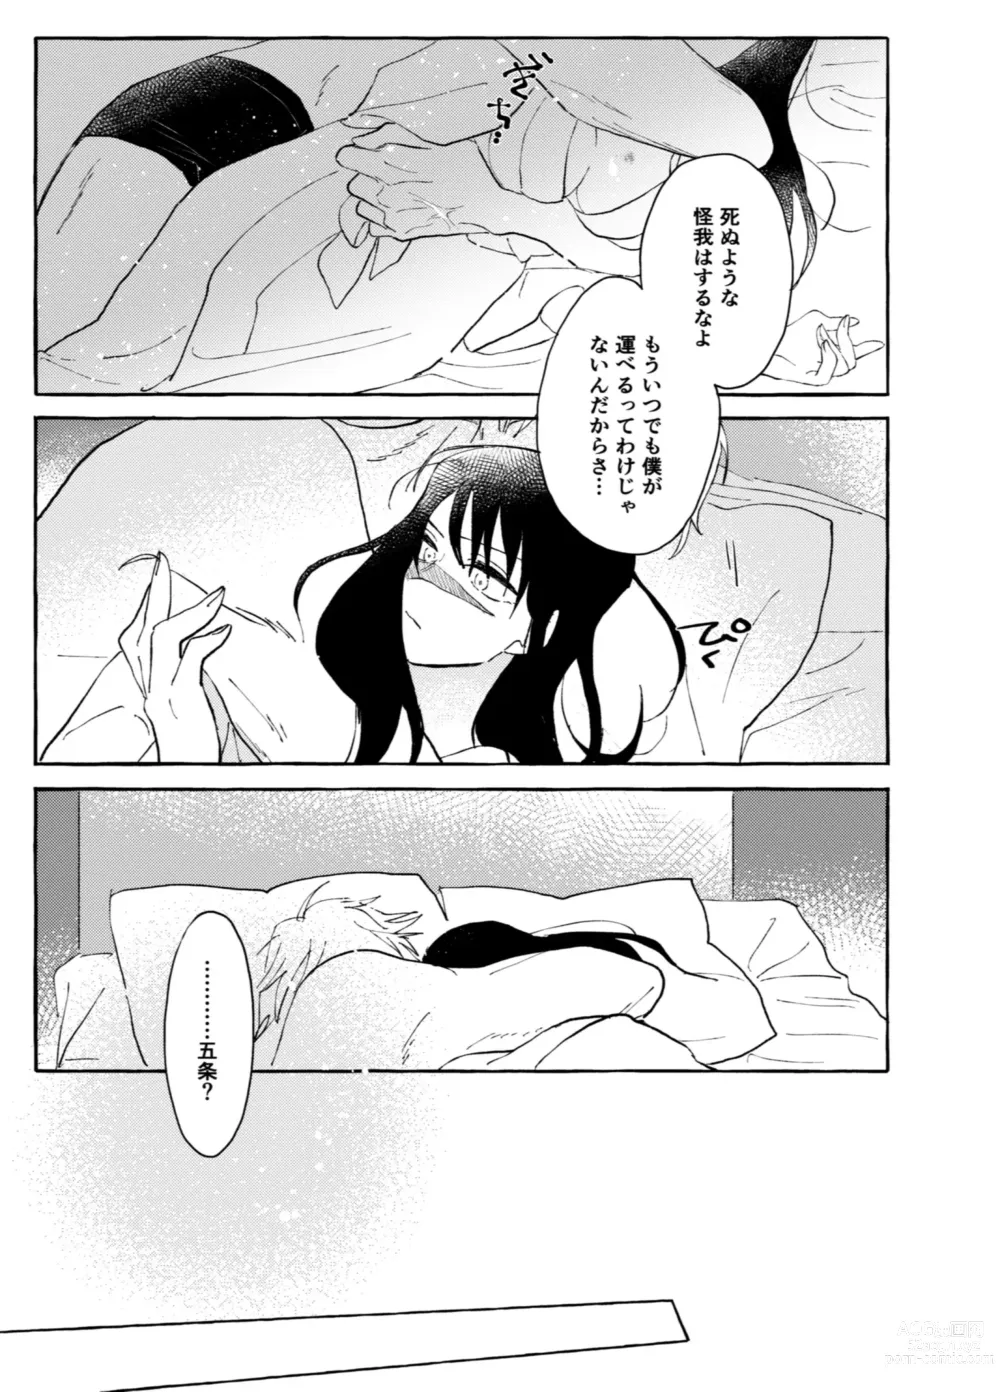 Page 22 of doujinshi One of These Nights